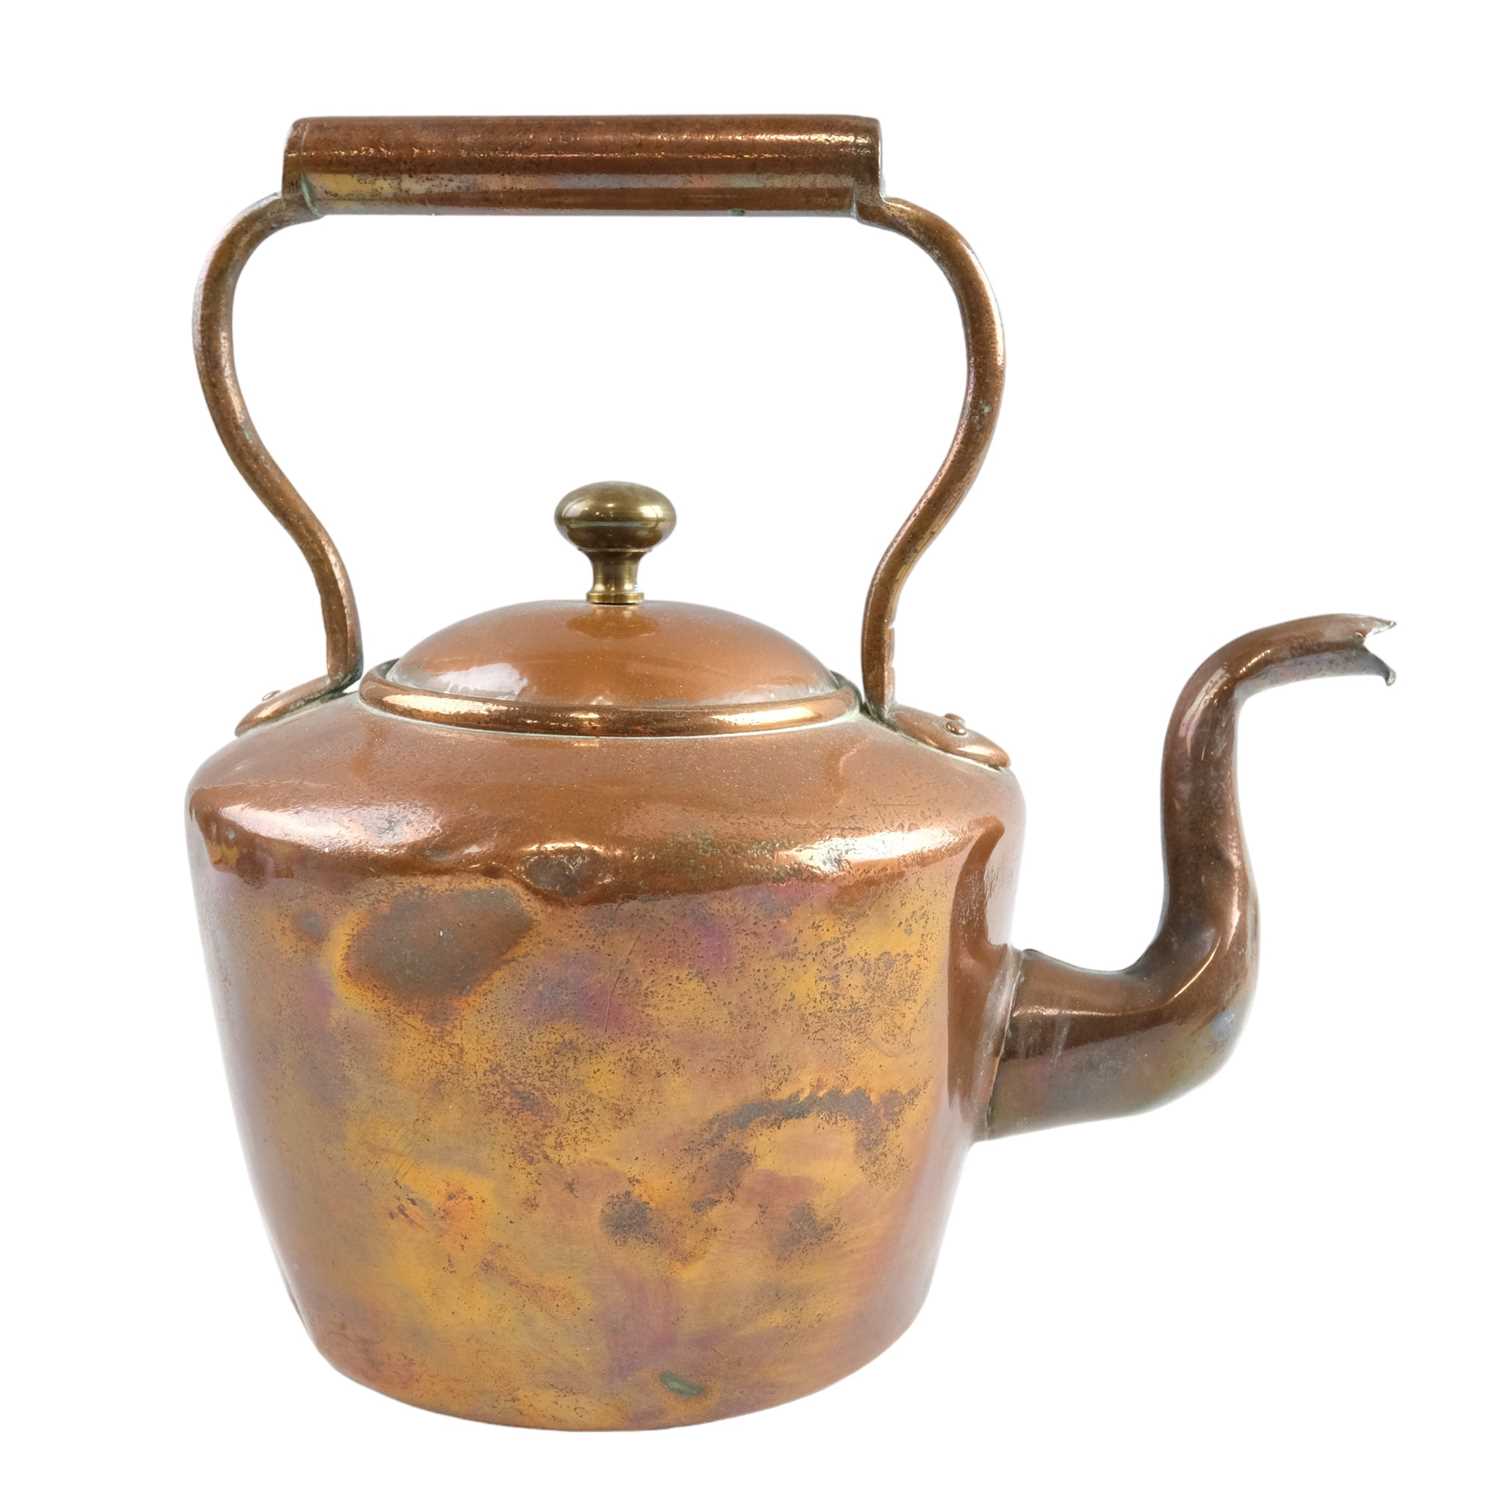 A Victorian copper kettle and four copper and brass diminutive 2-ounce saucepans, kettle 26 cm - Image 2 of 2